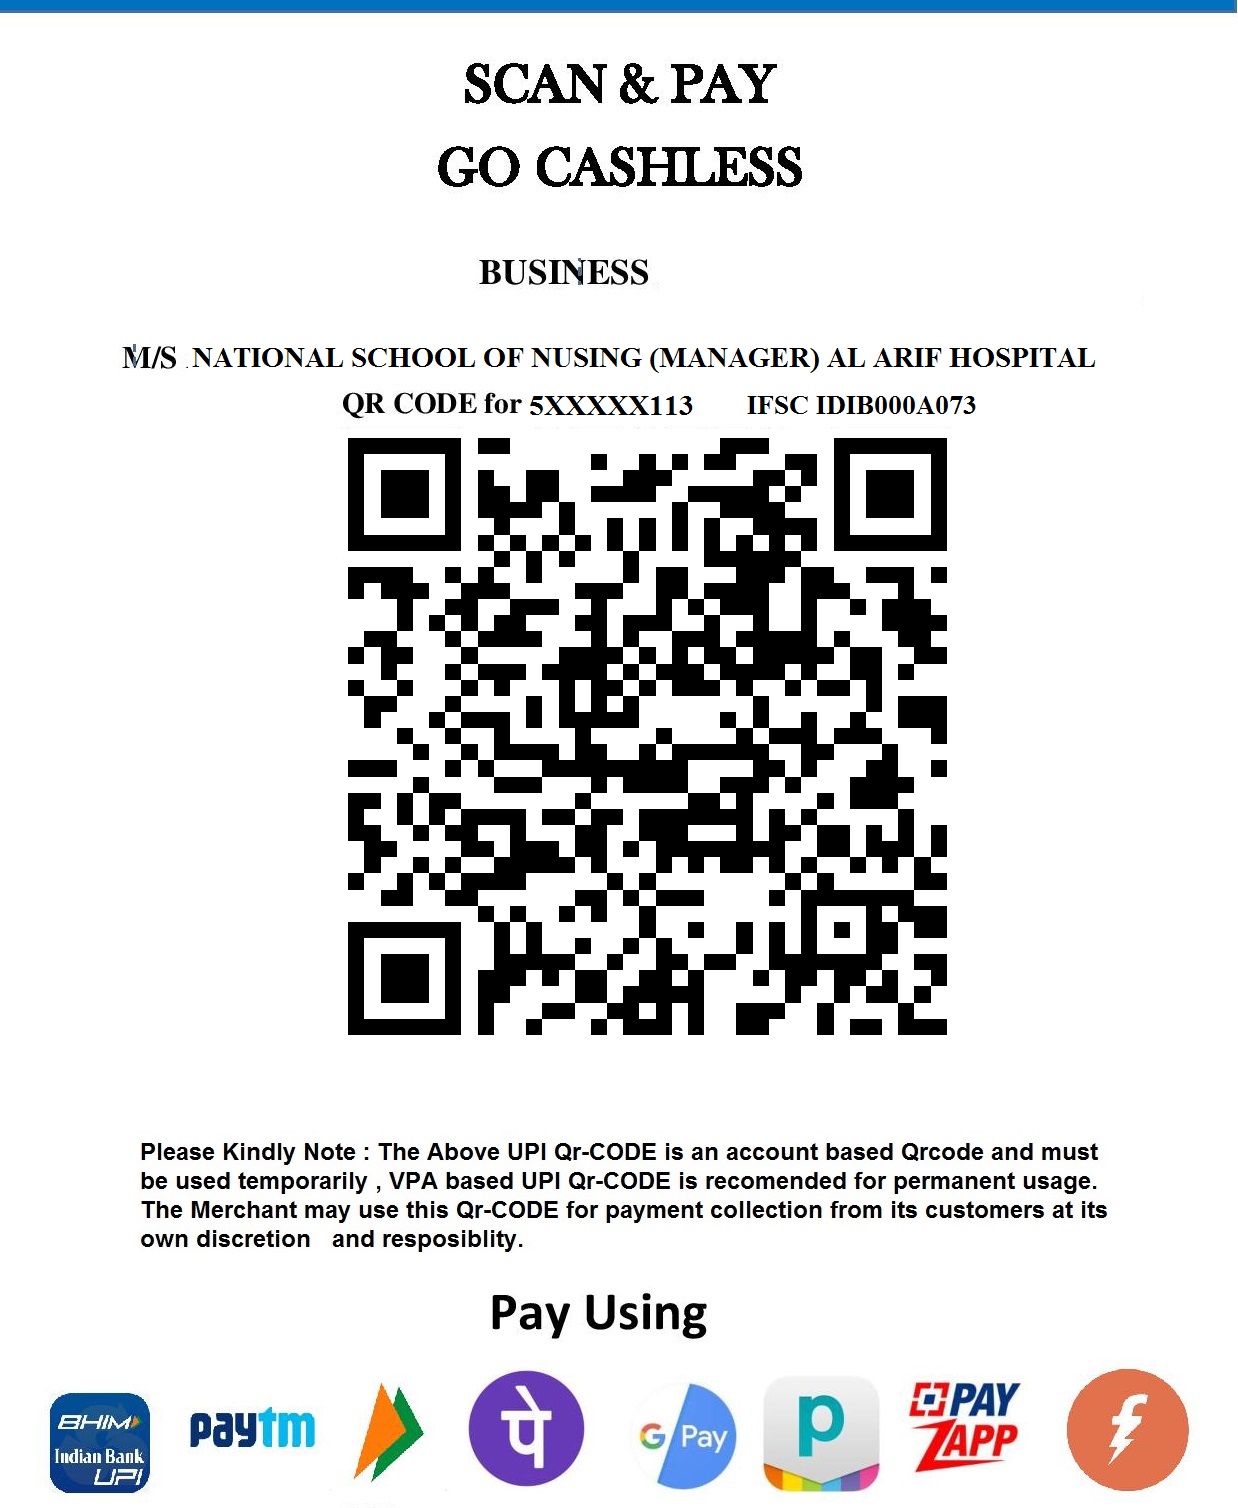 Scan and Pay Registration Fee of Rs 200